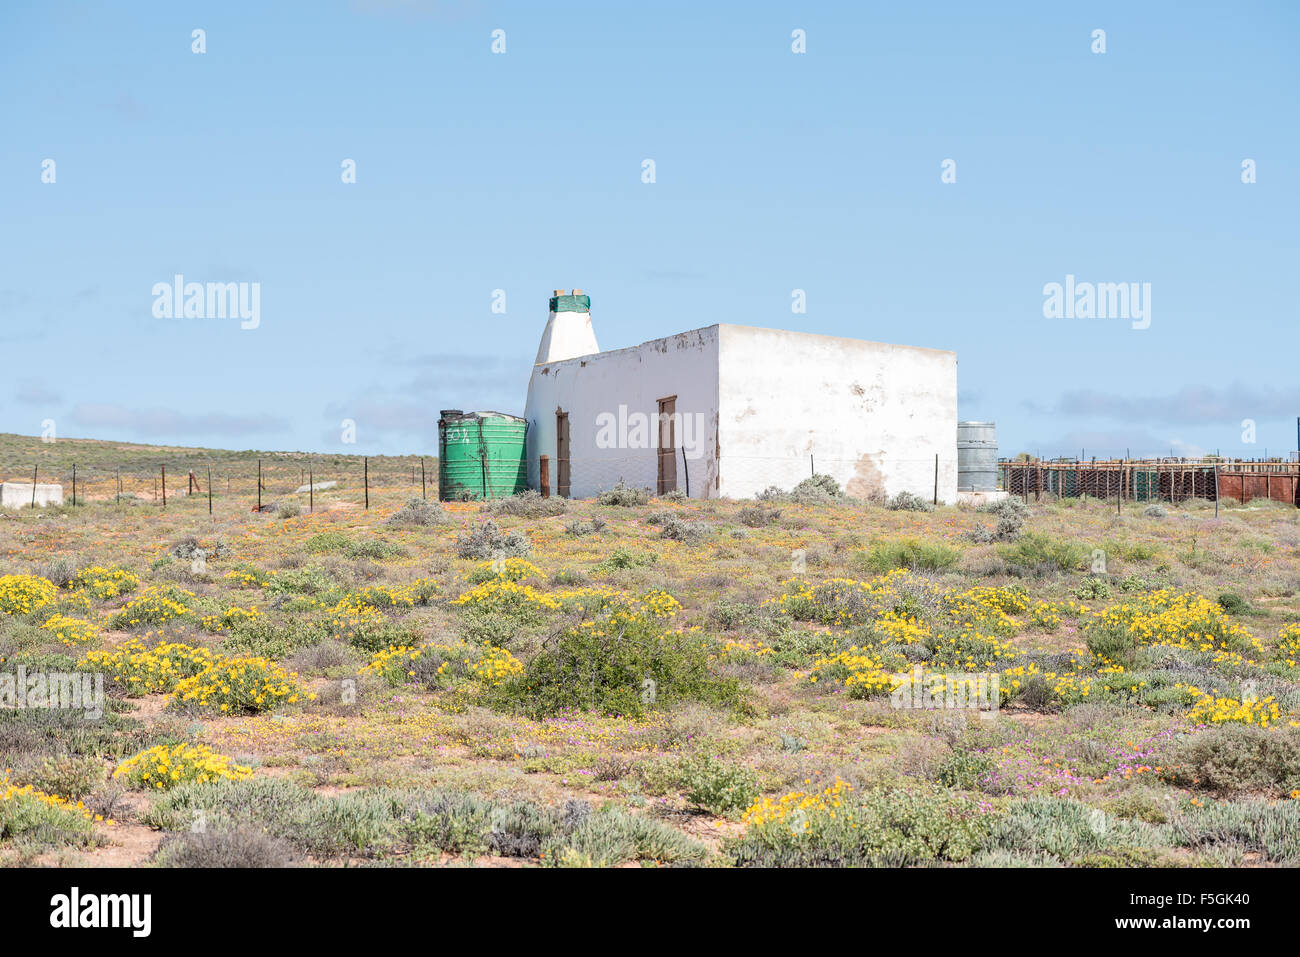 A farm house next to the road from Spoegrivier (spit river) to Klipfontein in the Northern Cape Namaqualand region of South Afri Stock Photo